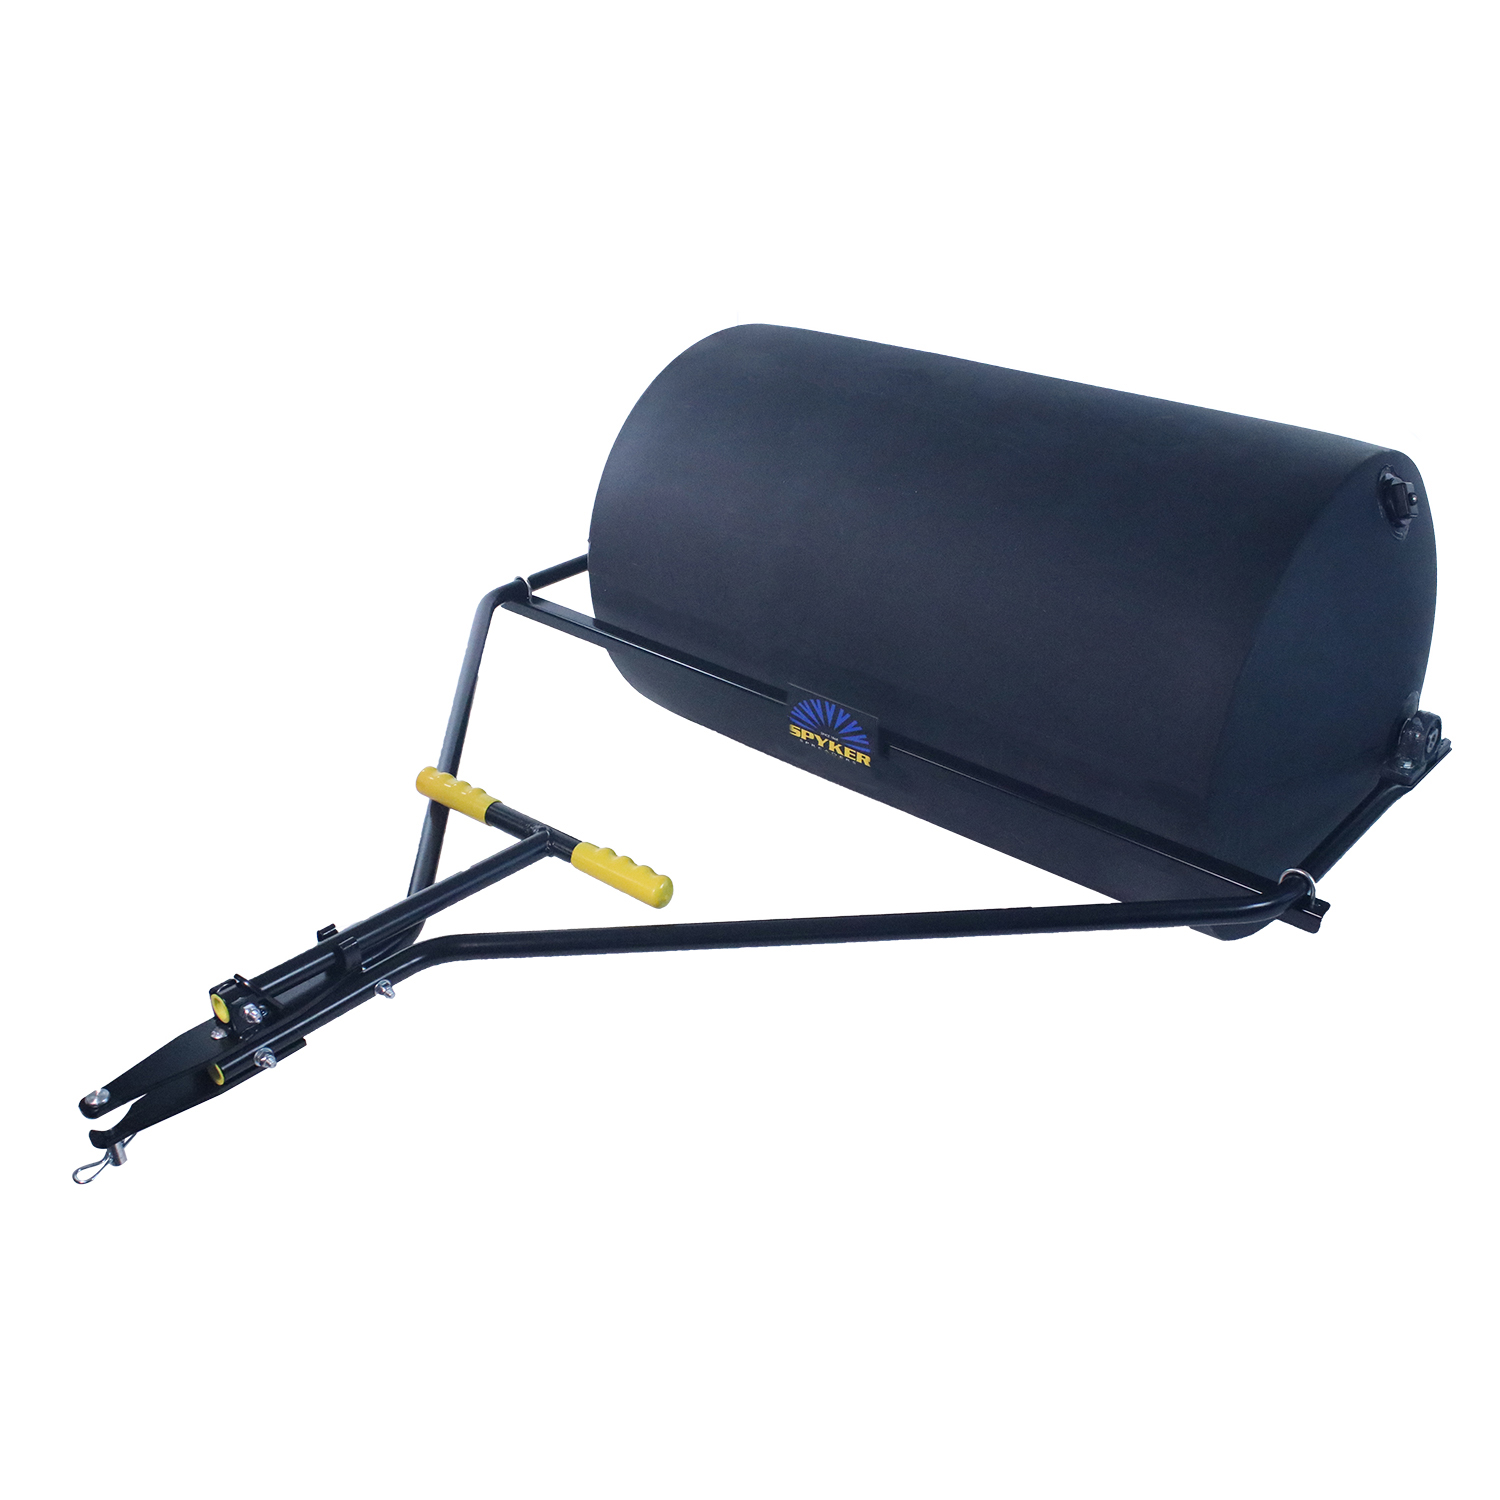 R76-2436 770# COMMERCIAL TOW-BEHIND LAWN ROLLER, 24 x 36